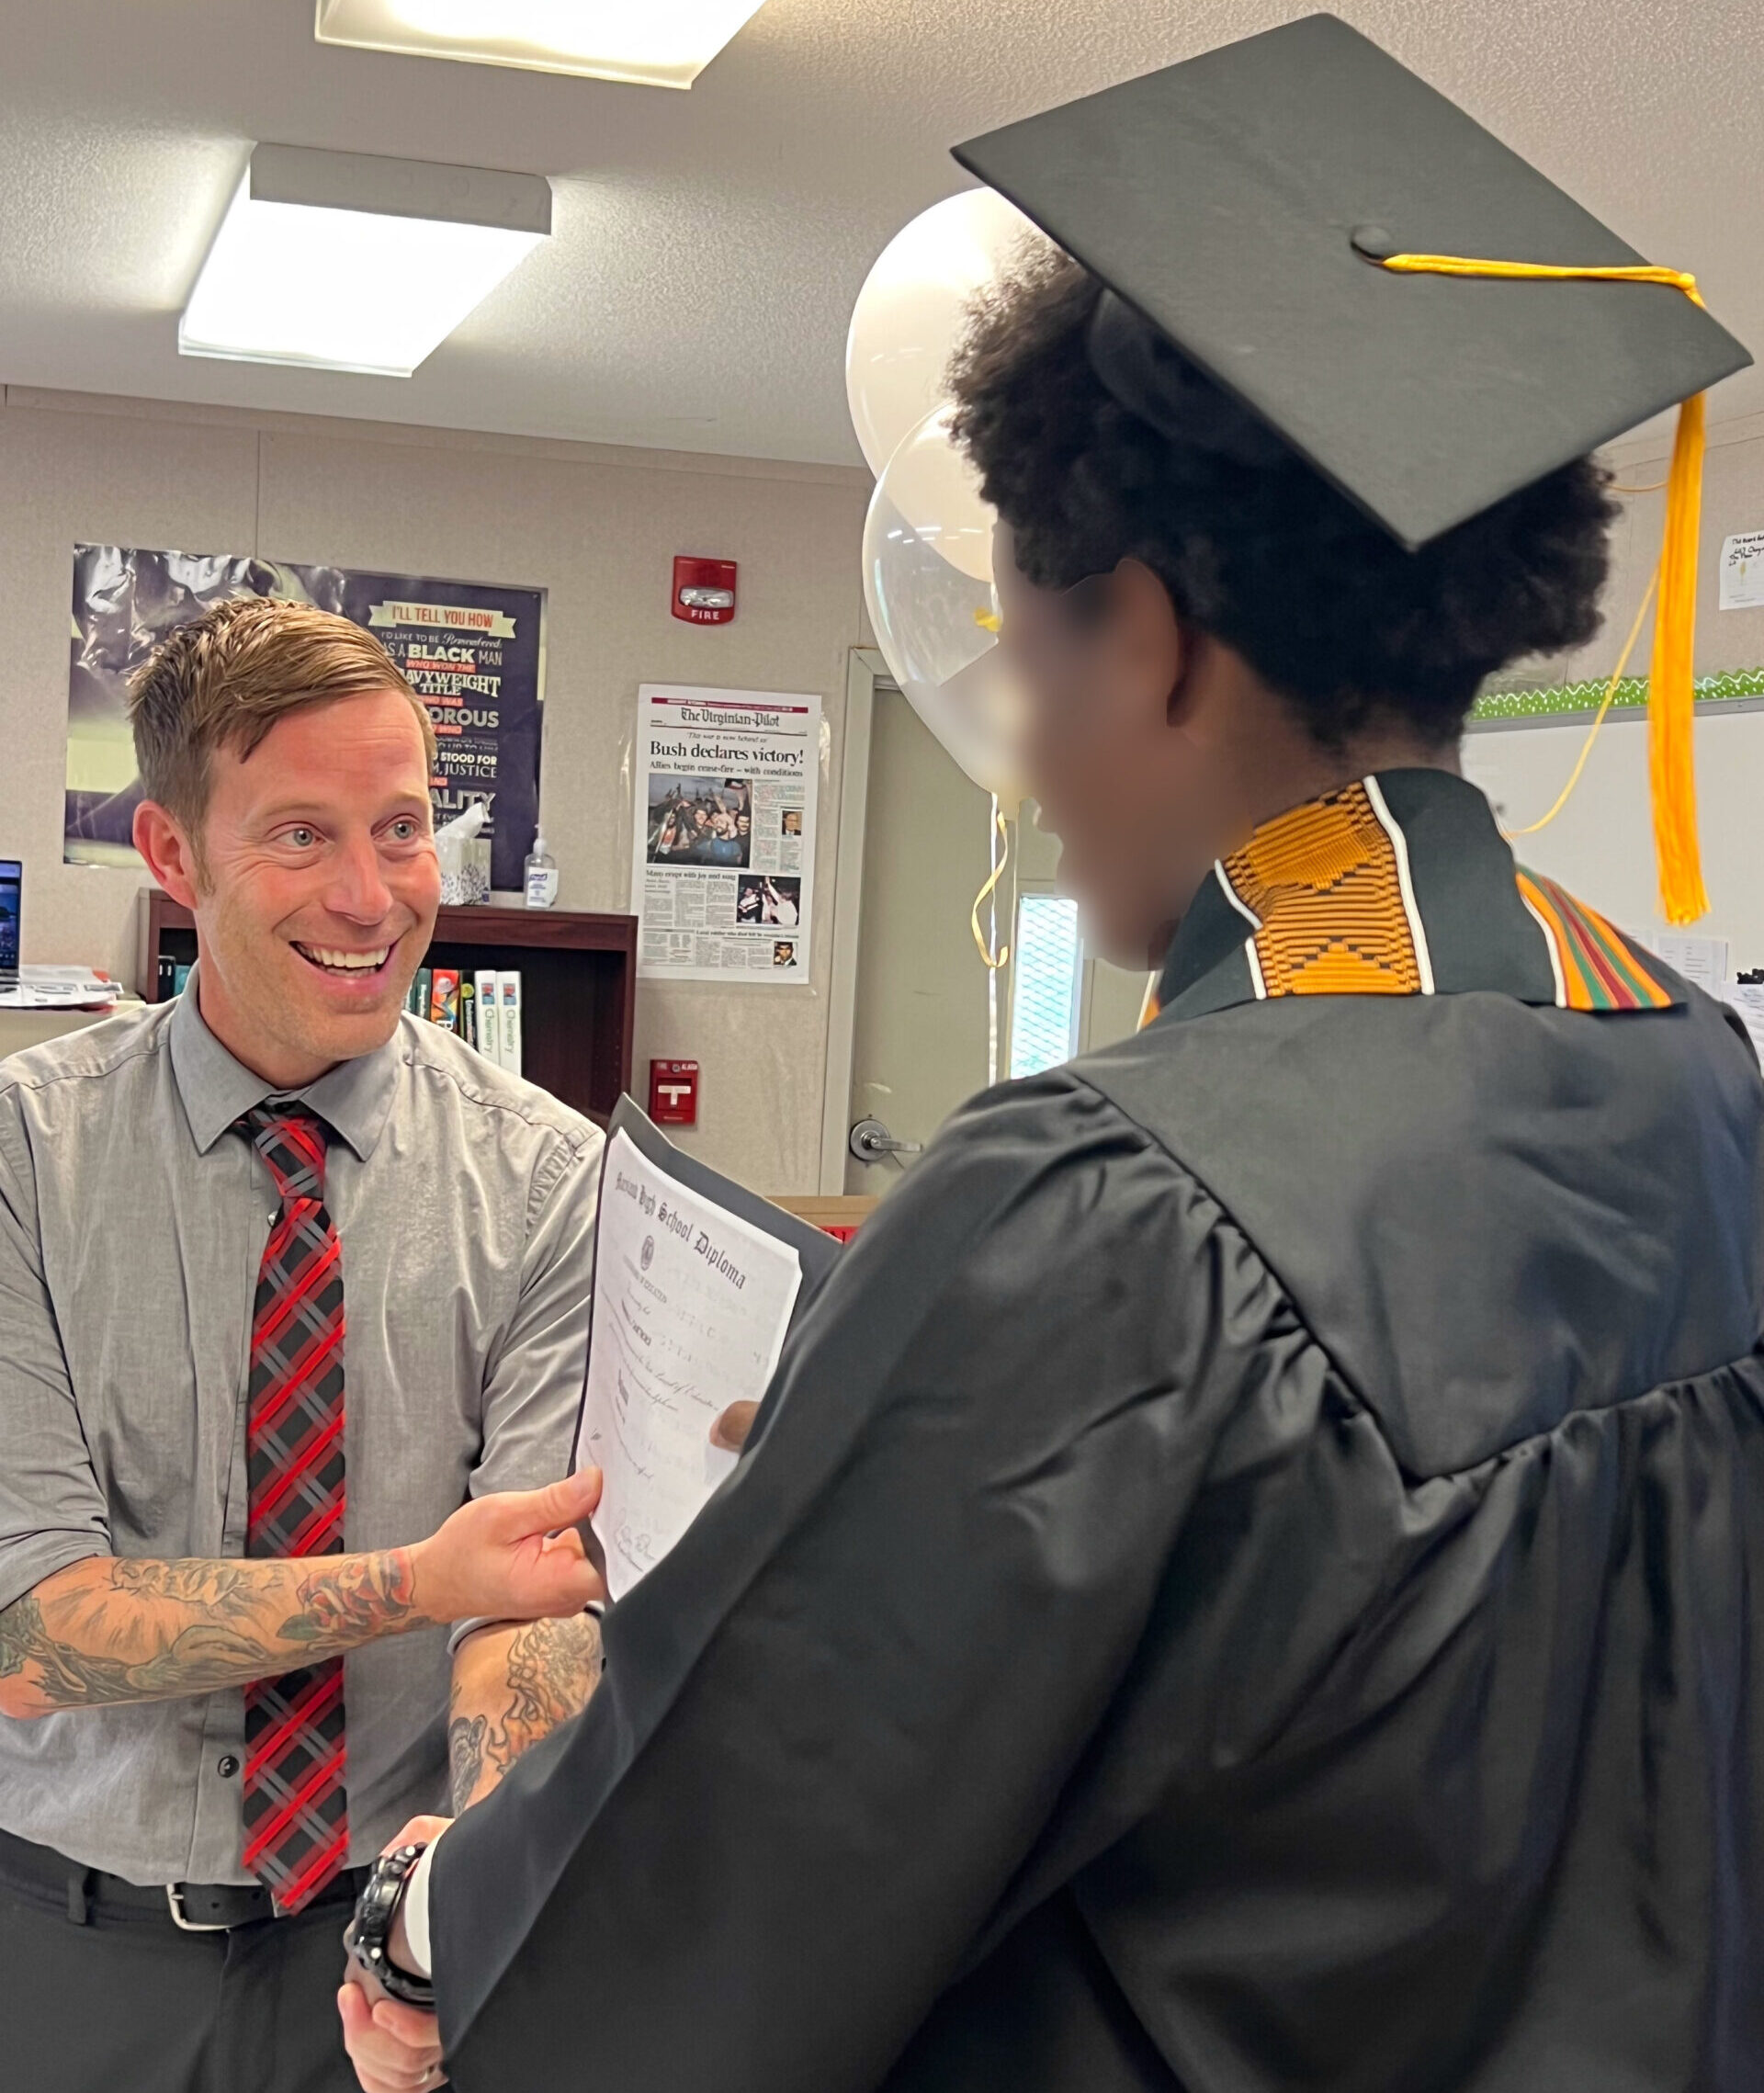 A recent high school graduate wearing a black cap and gown shakes hands with his principal as he receives his diploma.